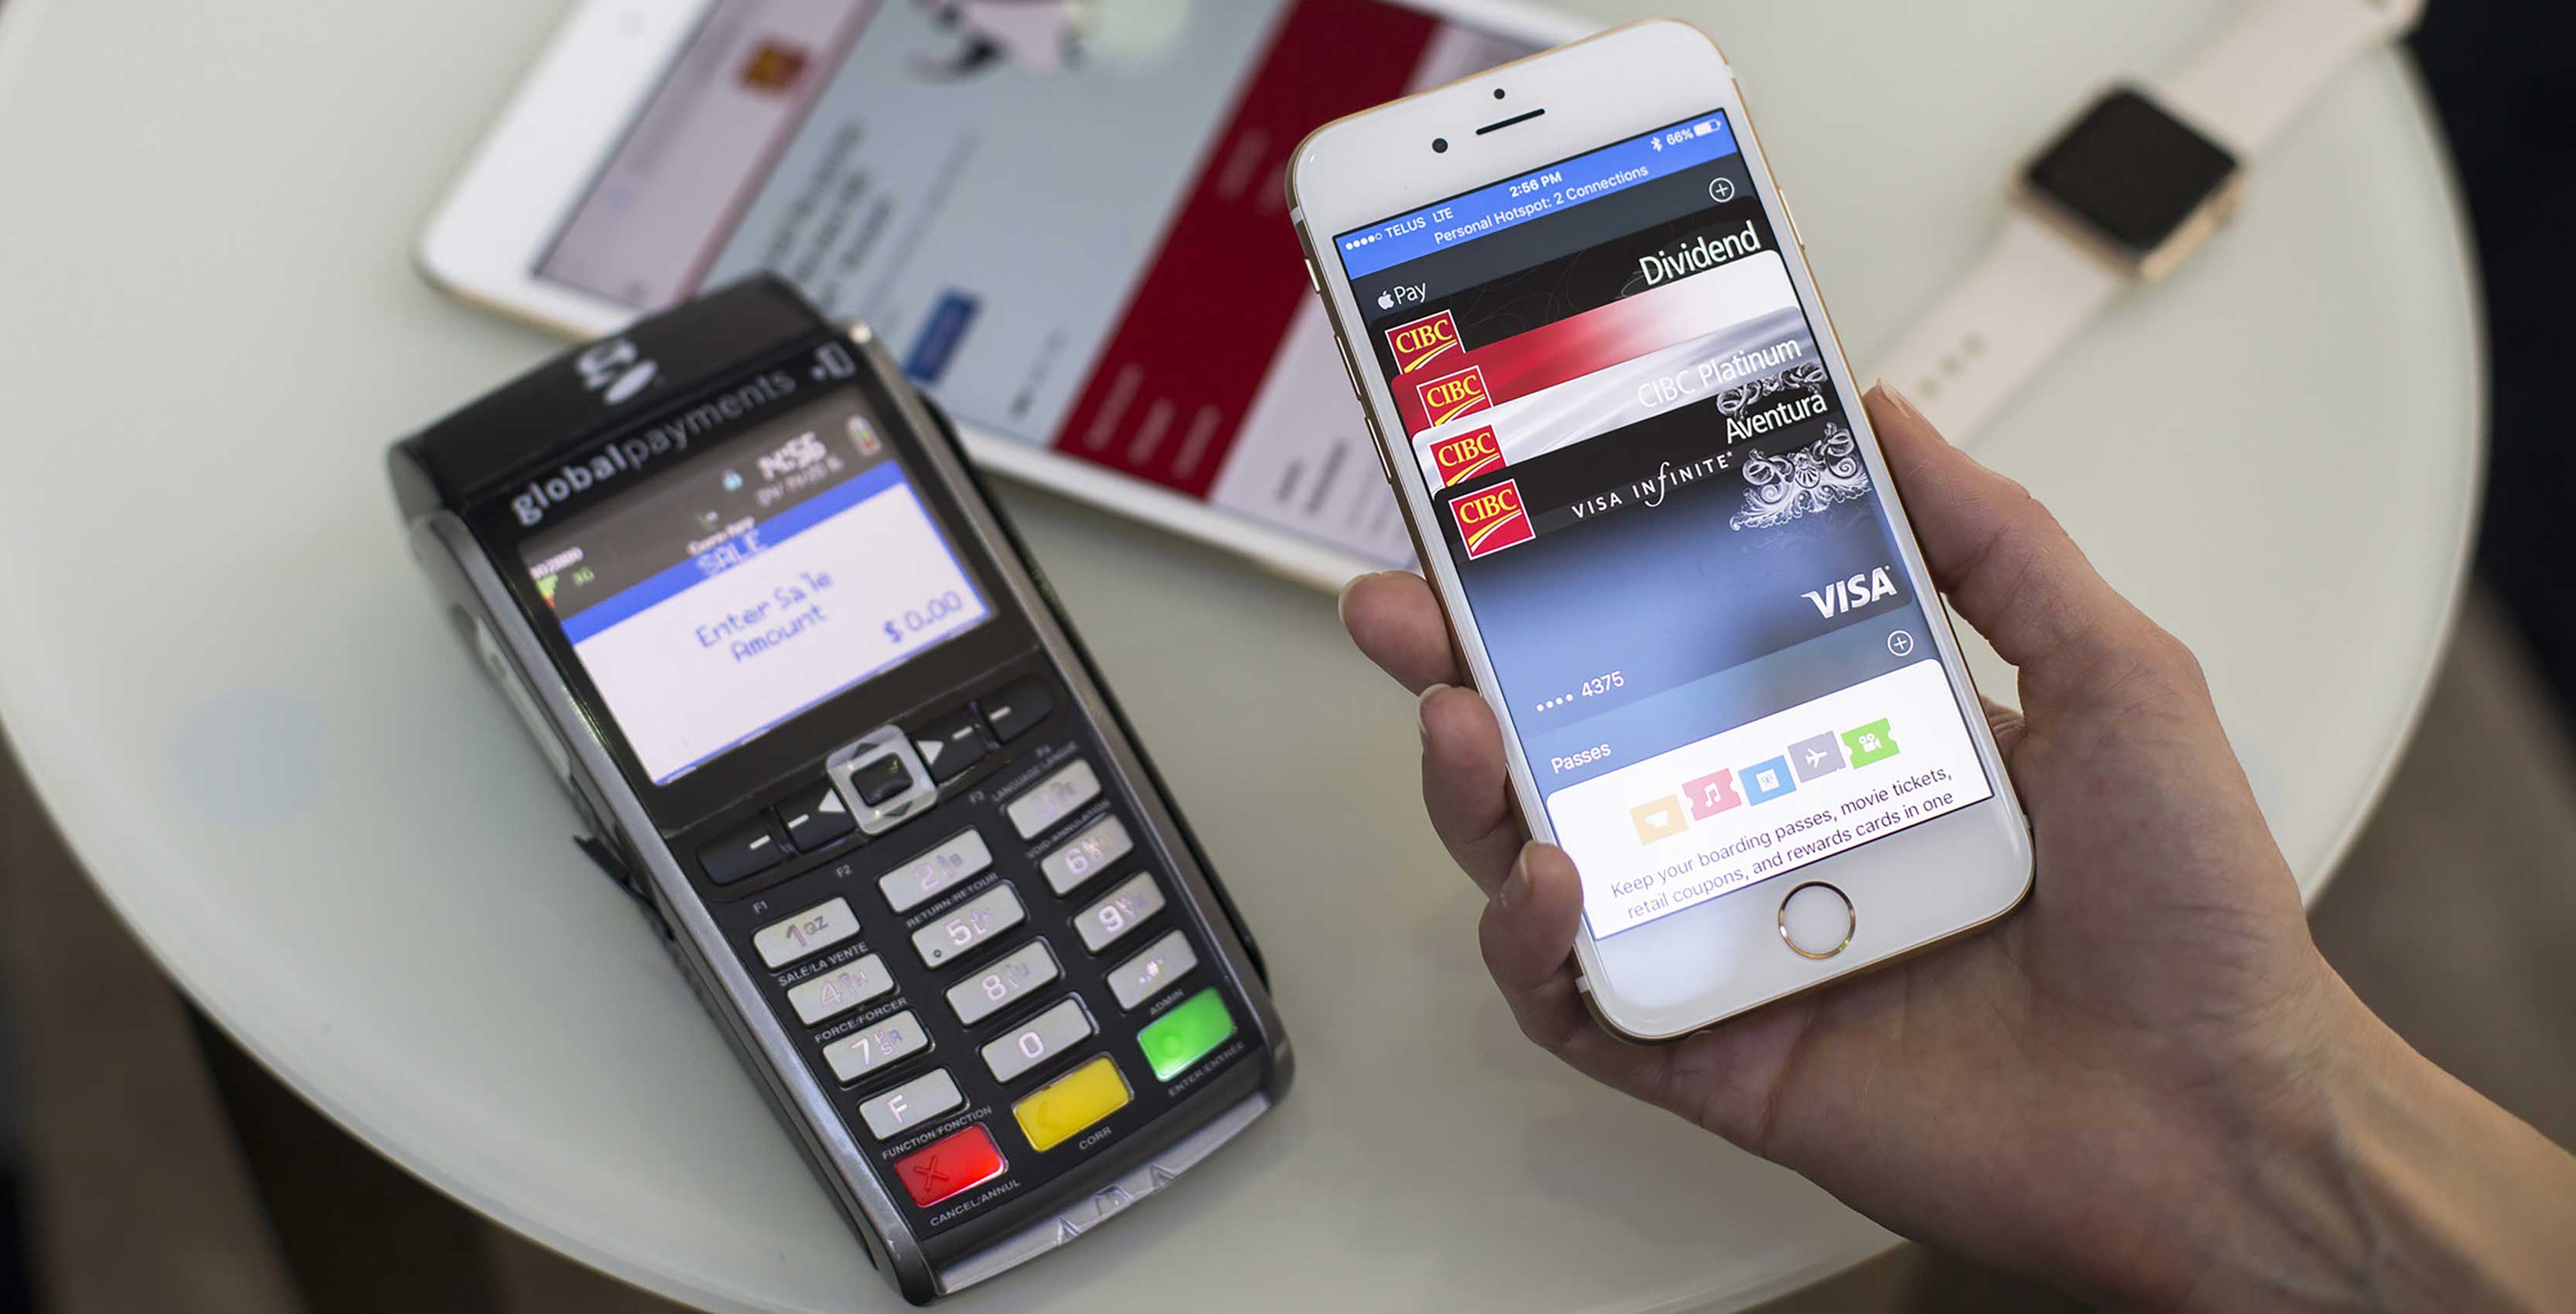 Apple pay in action